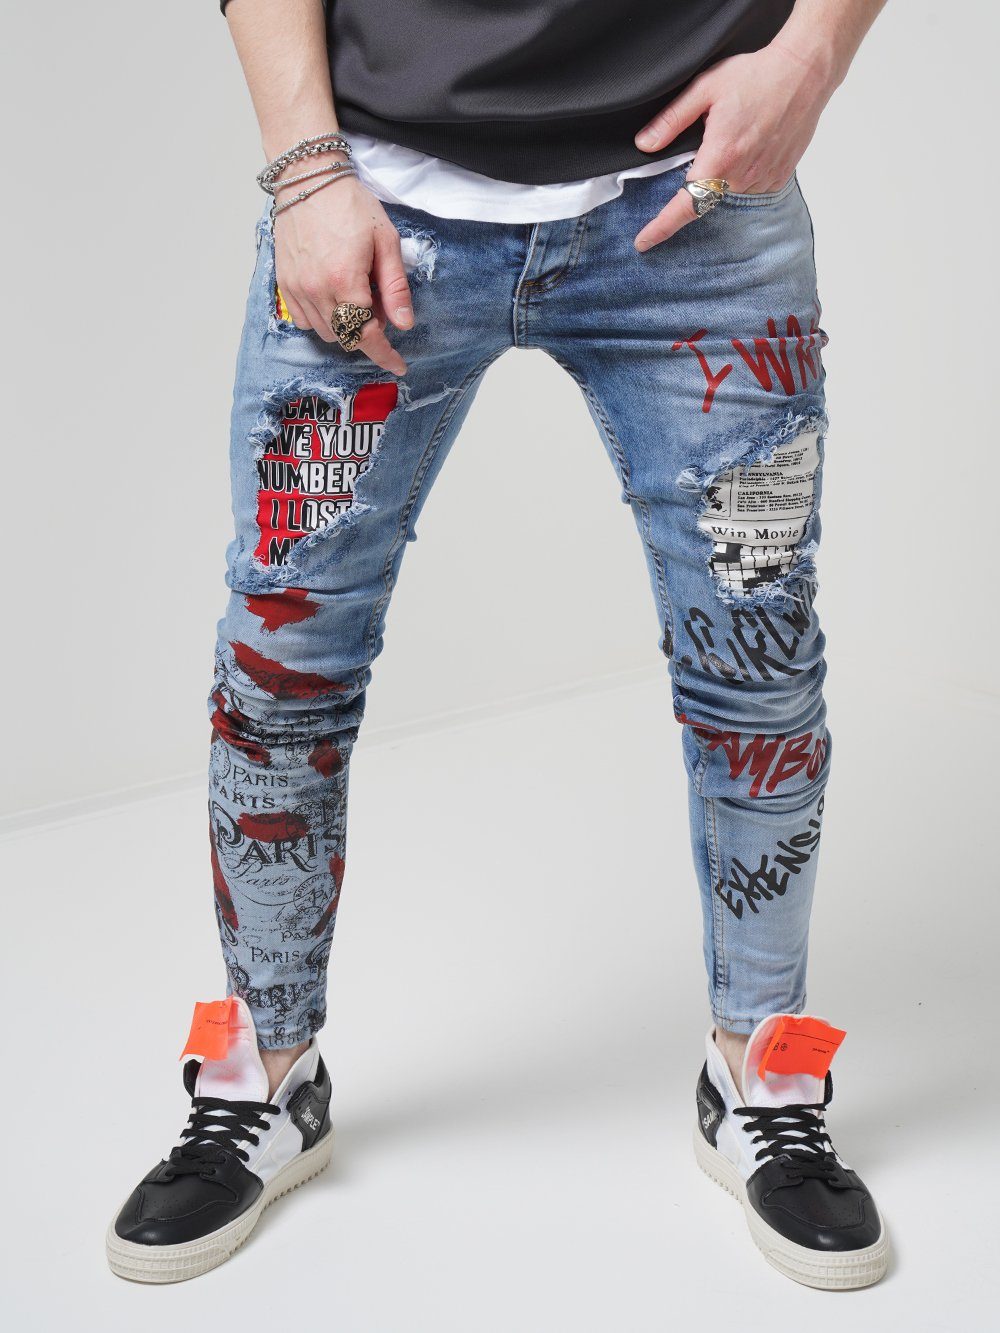 A man wearing a pair of BANKSY jeans with graffiti on them.